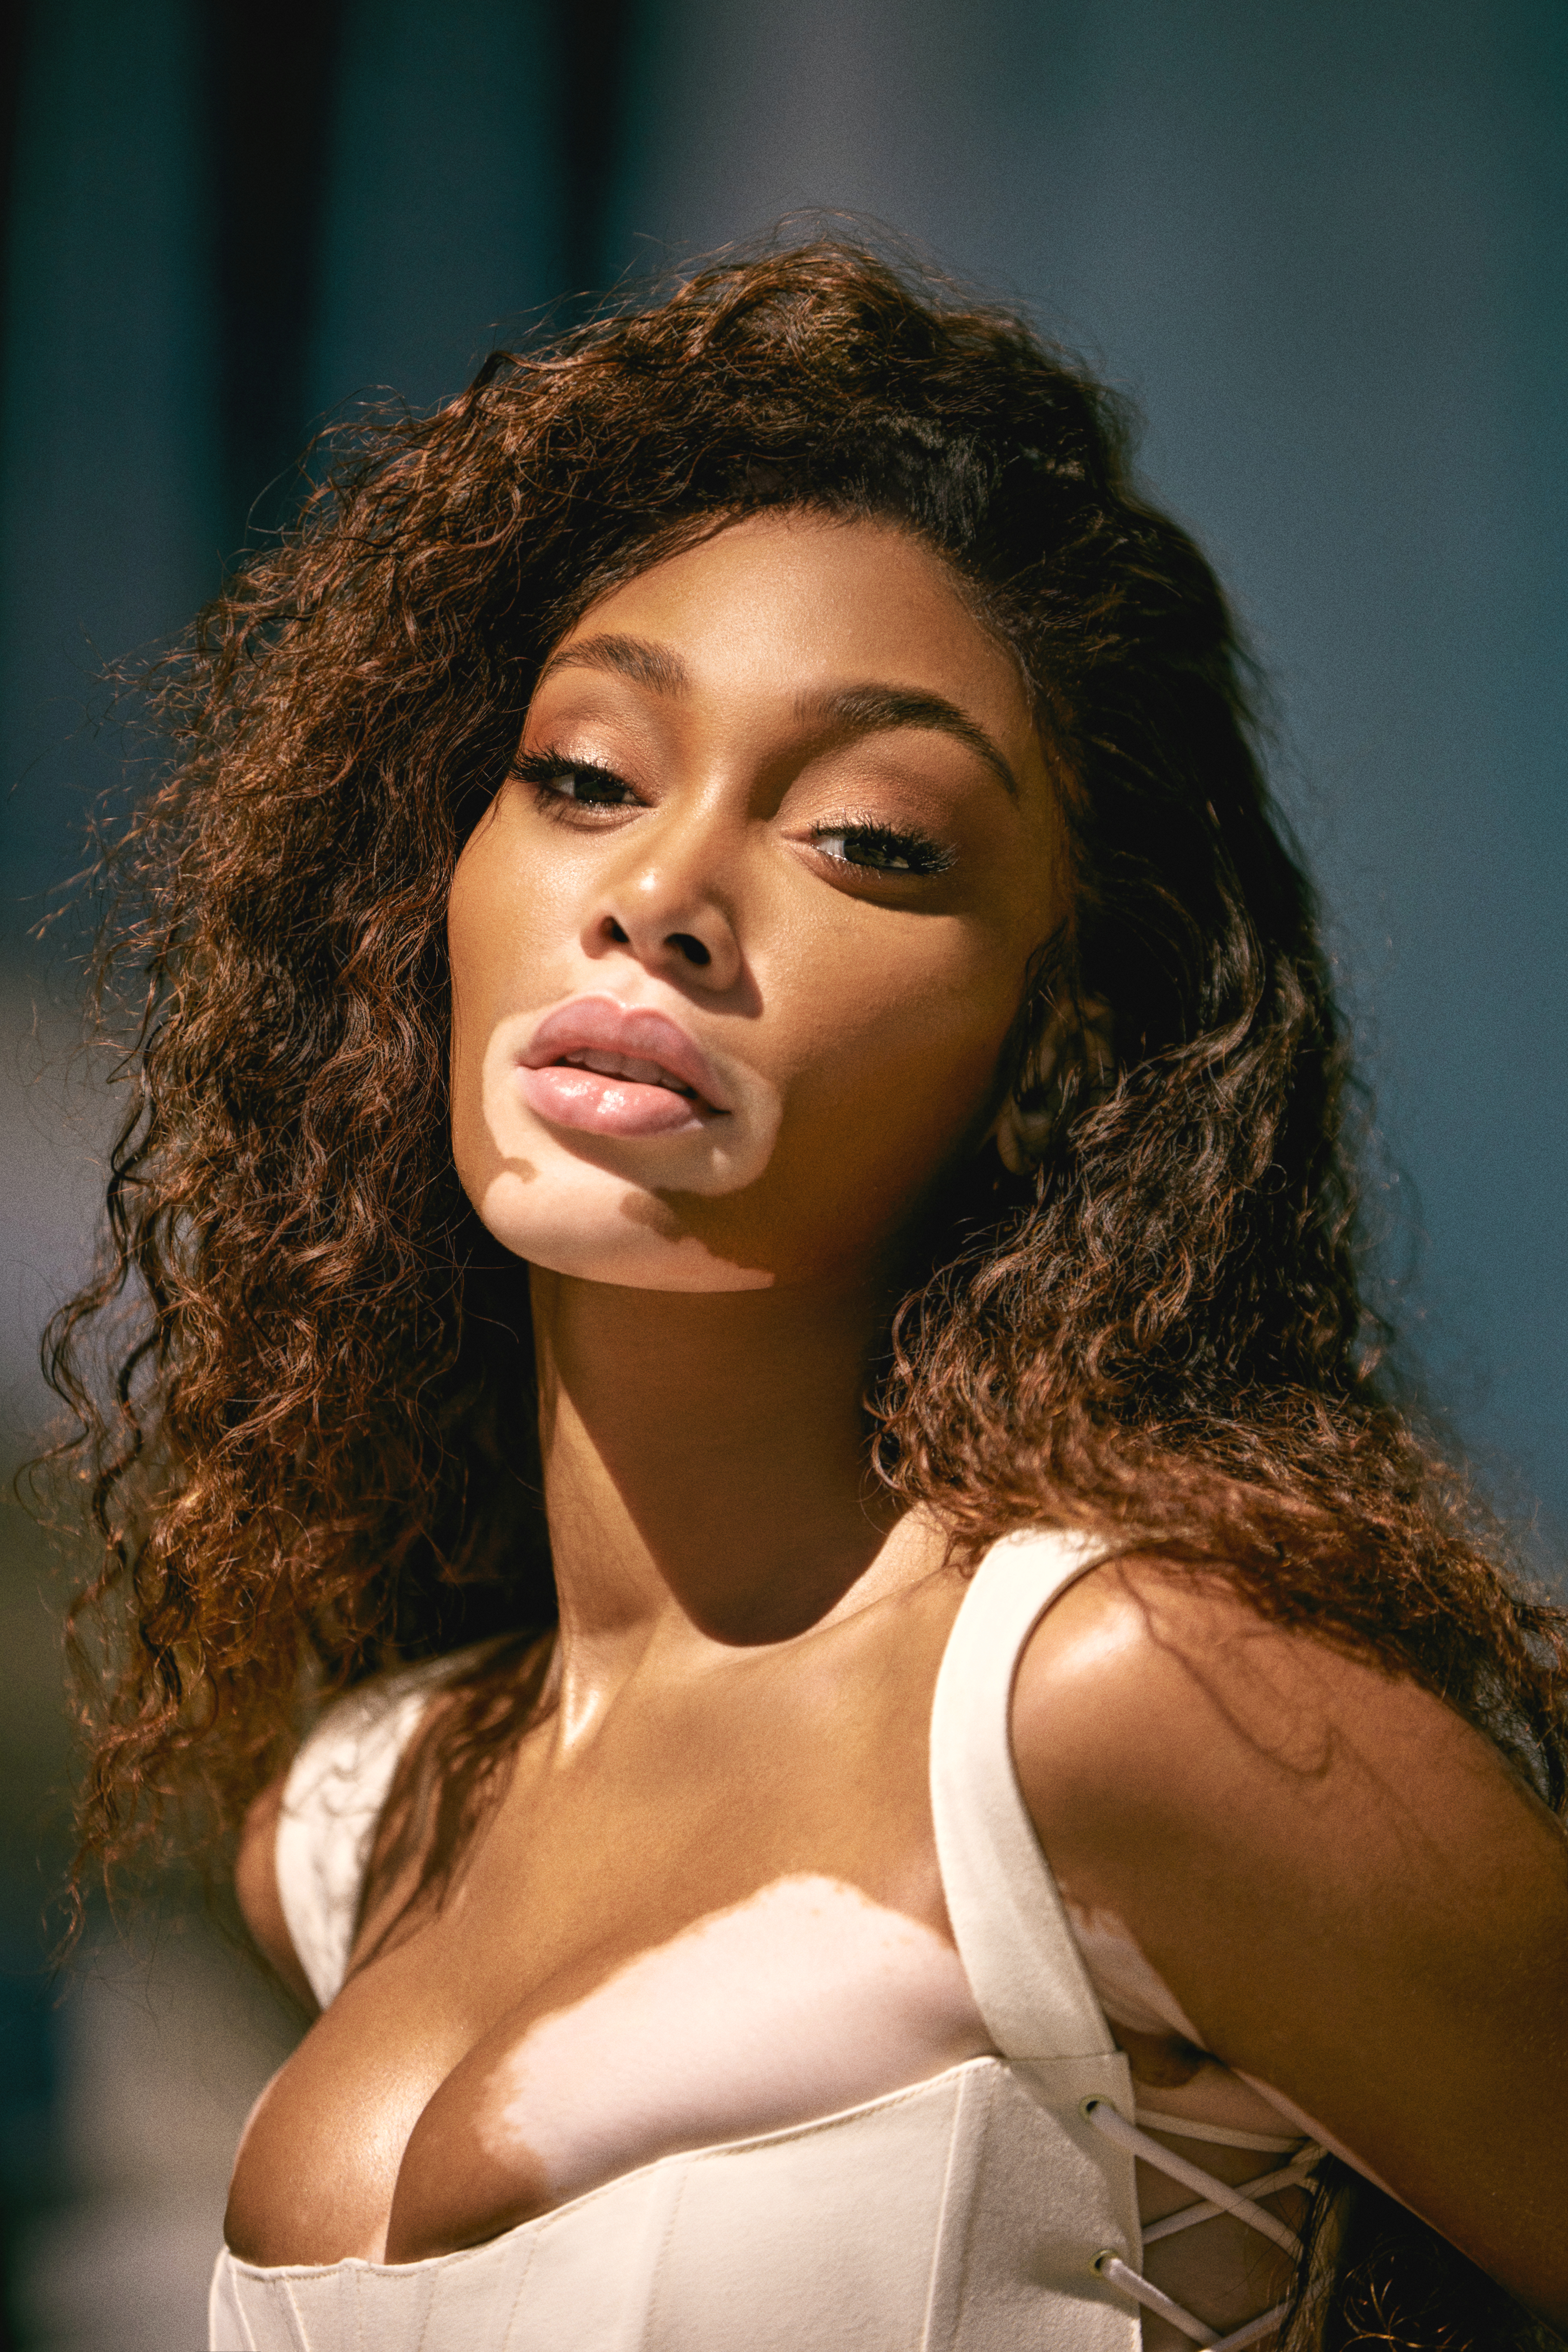 Winnie Harlow Is ‘Annoyed’ With The Algorithm, And Honestly, We Get Why